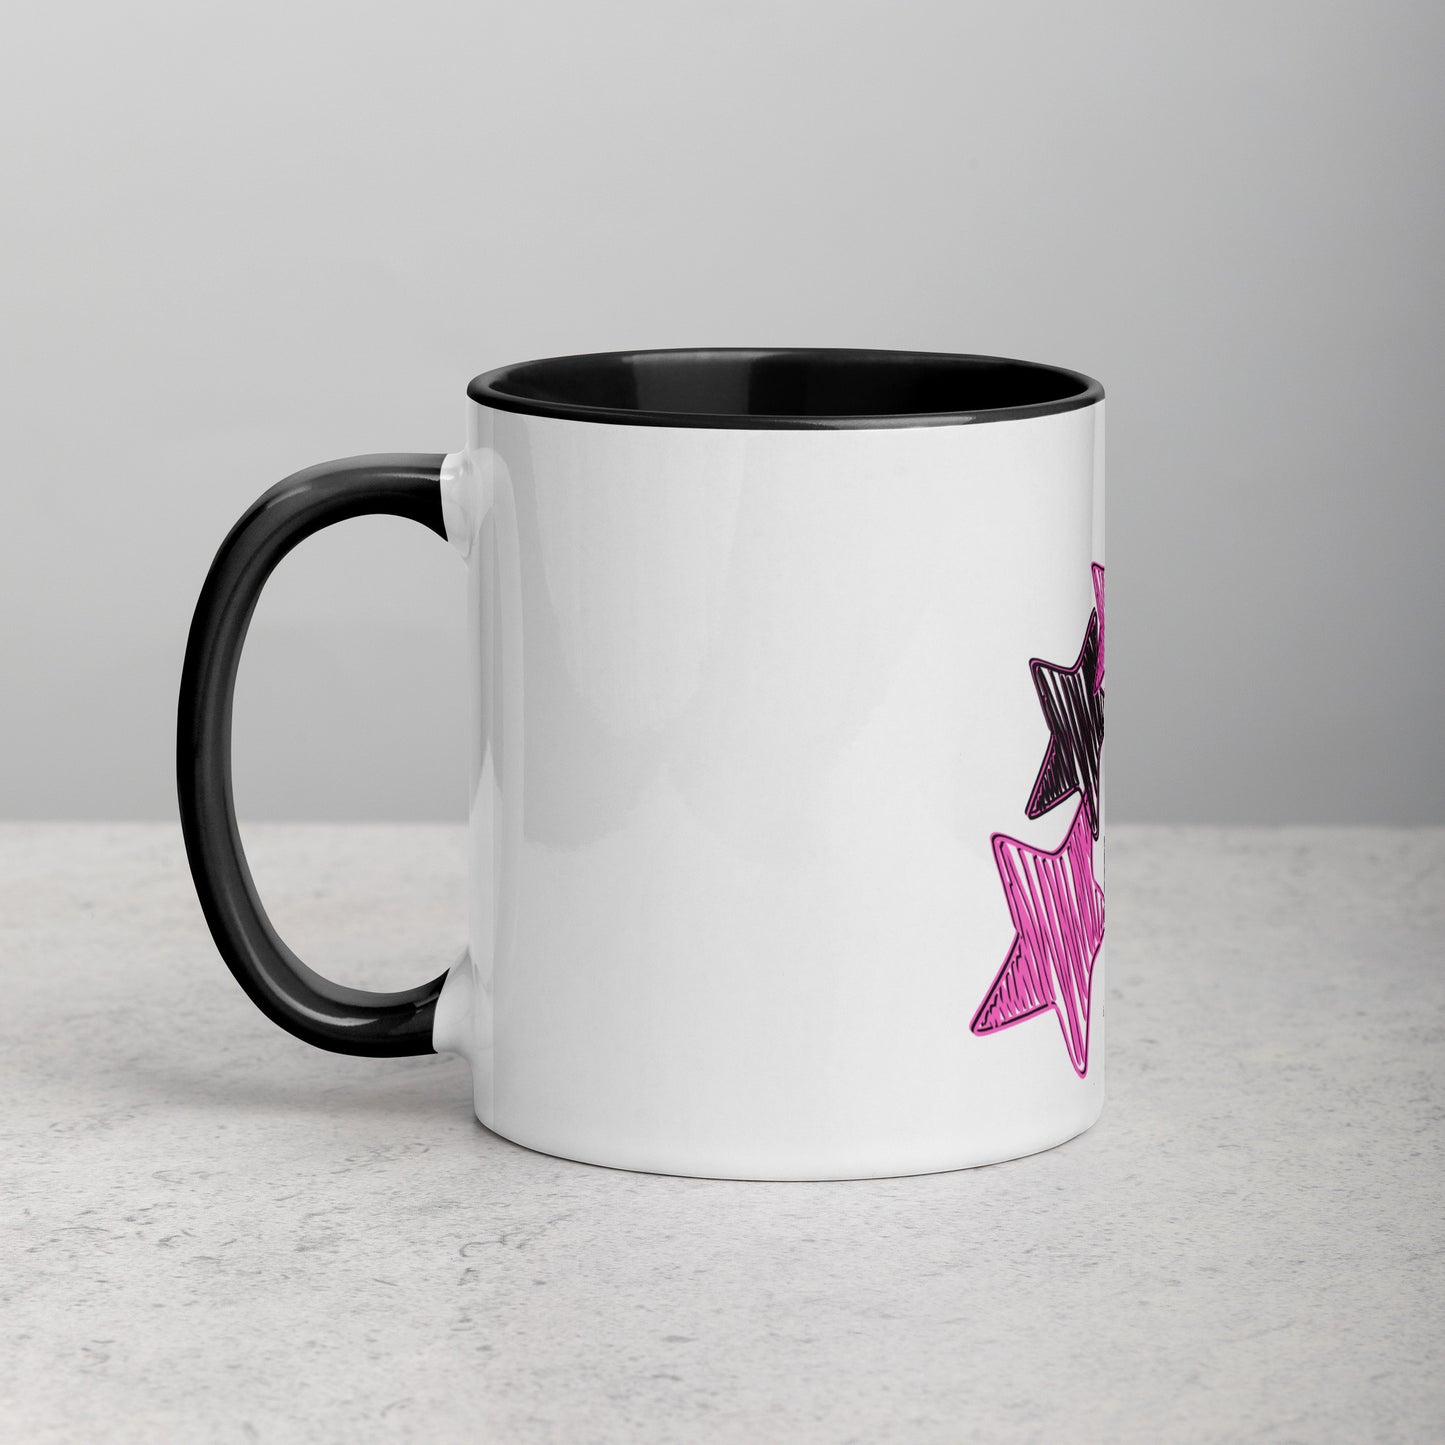 'Pink' Rising Star - Five Star Fresh Mug with Color Inside